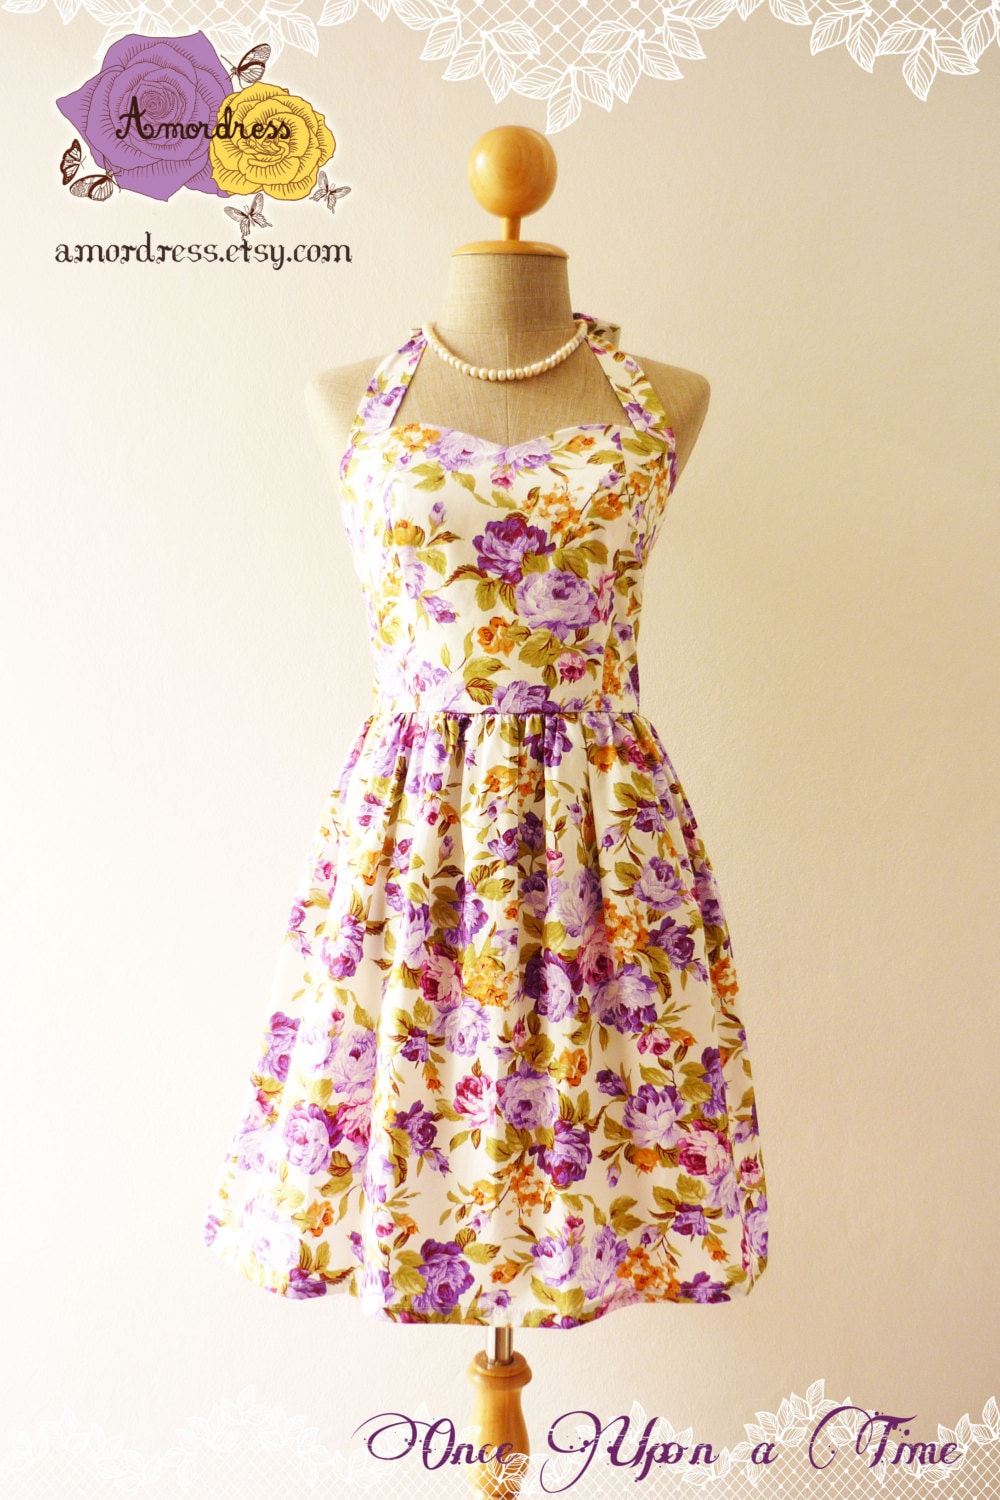 Floral Bridesmaid Dress Summer Dress Party Dress by Amordress